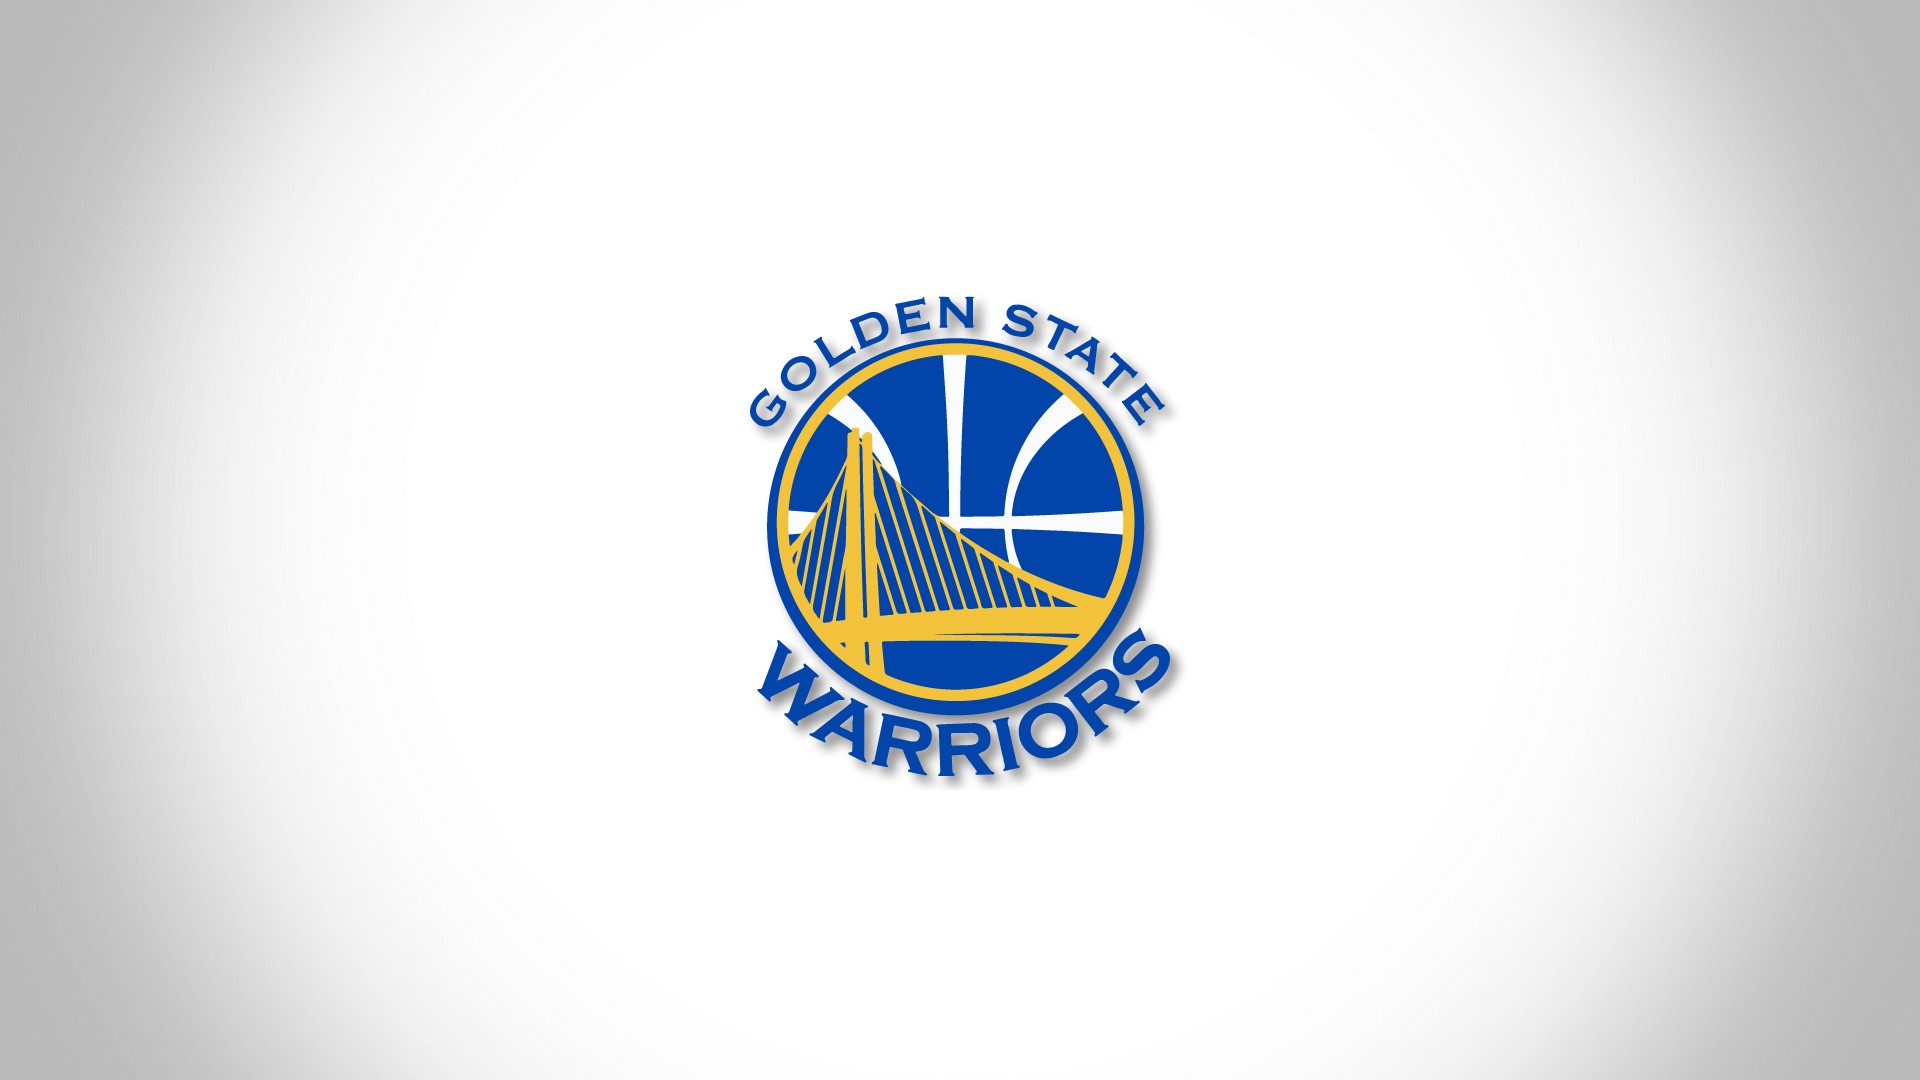 Computer Wallpapers Golden State Warriors with image resolution 1920x1080 pixel. You can use this wallpaper as background for your desktop Computer Screensavers, Android or iPhone smartphones